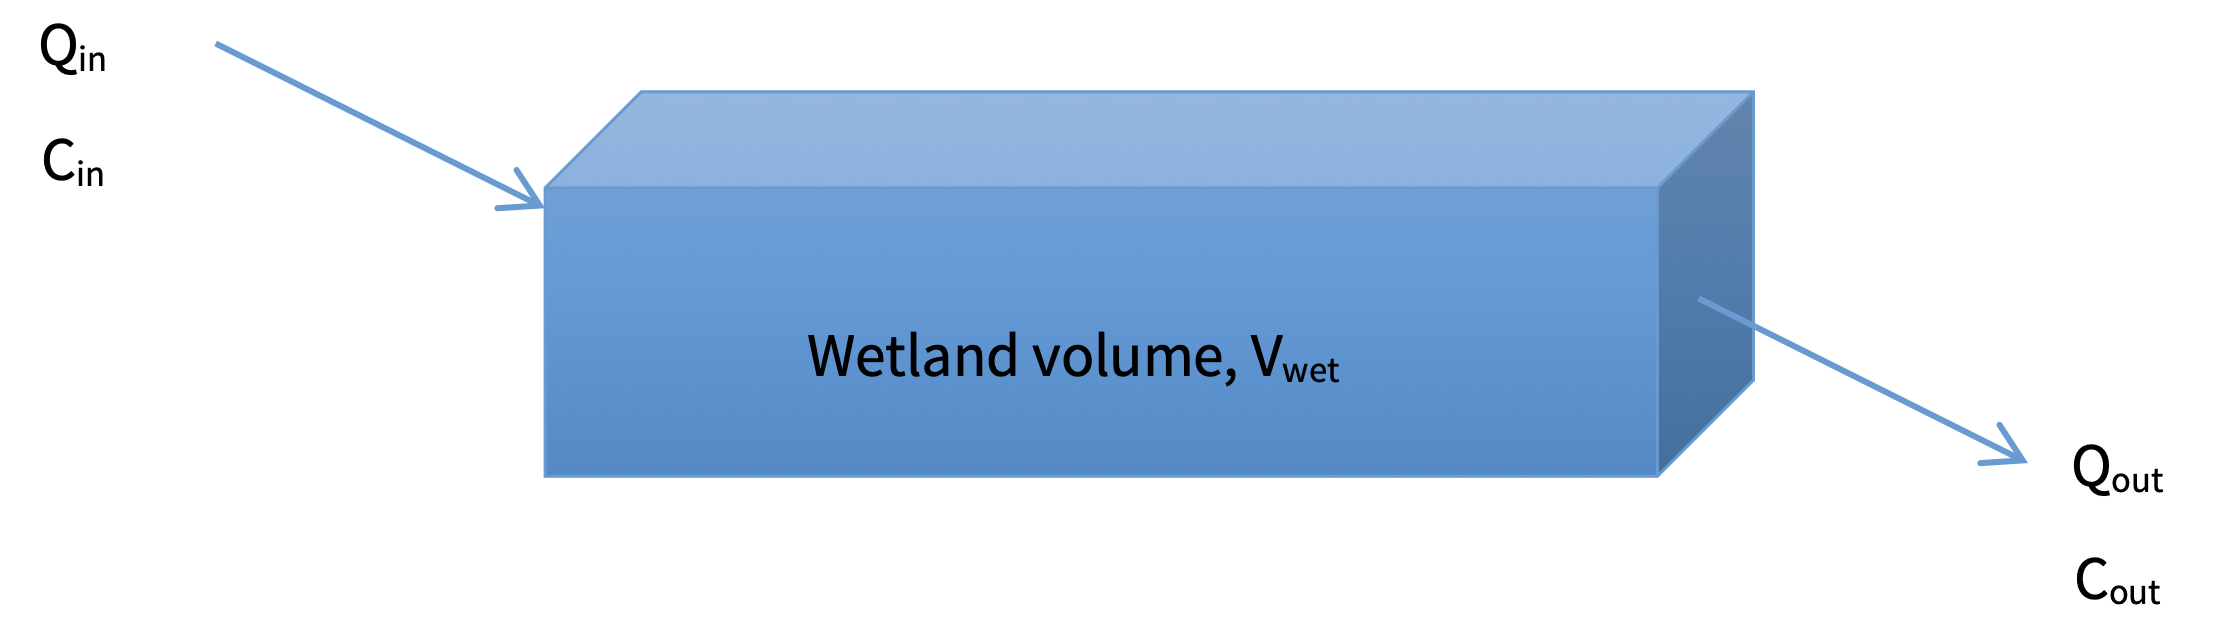 Schematic of wetland flushing time calculation.